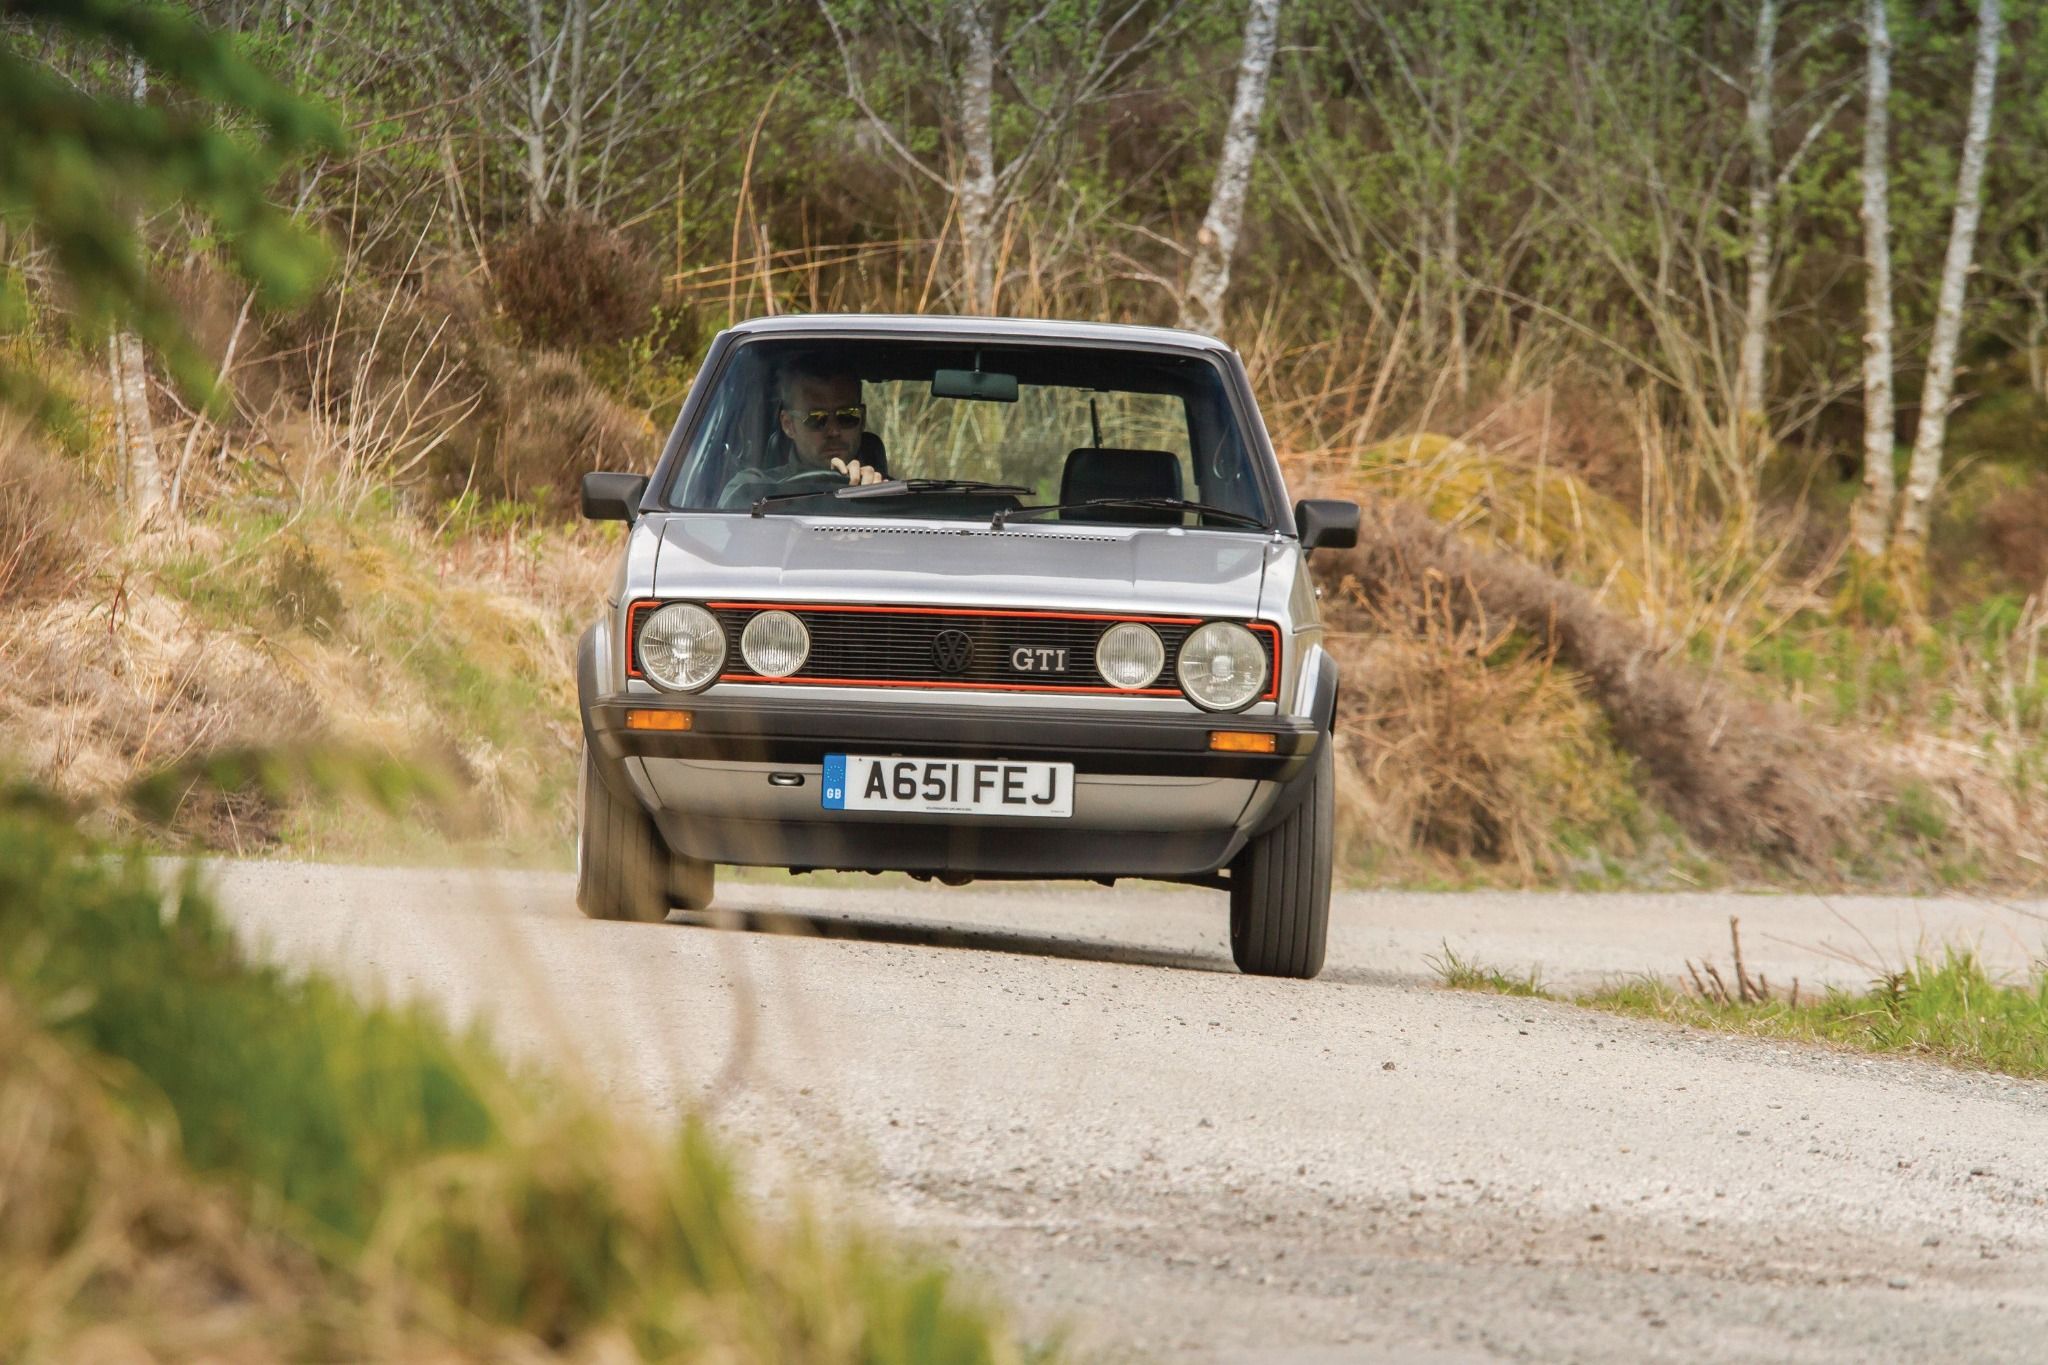 Front view of an MK1 Volkswagen Golf GTI driving down the road